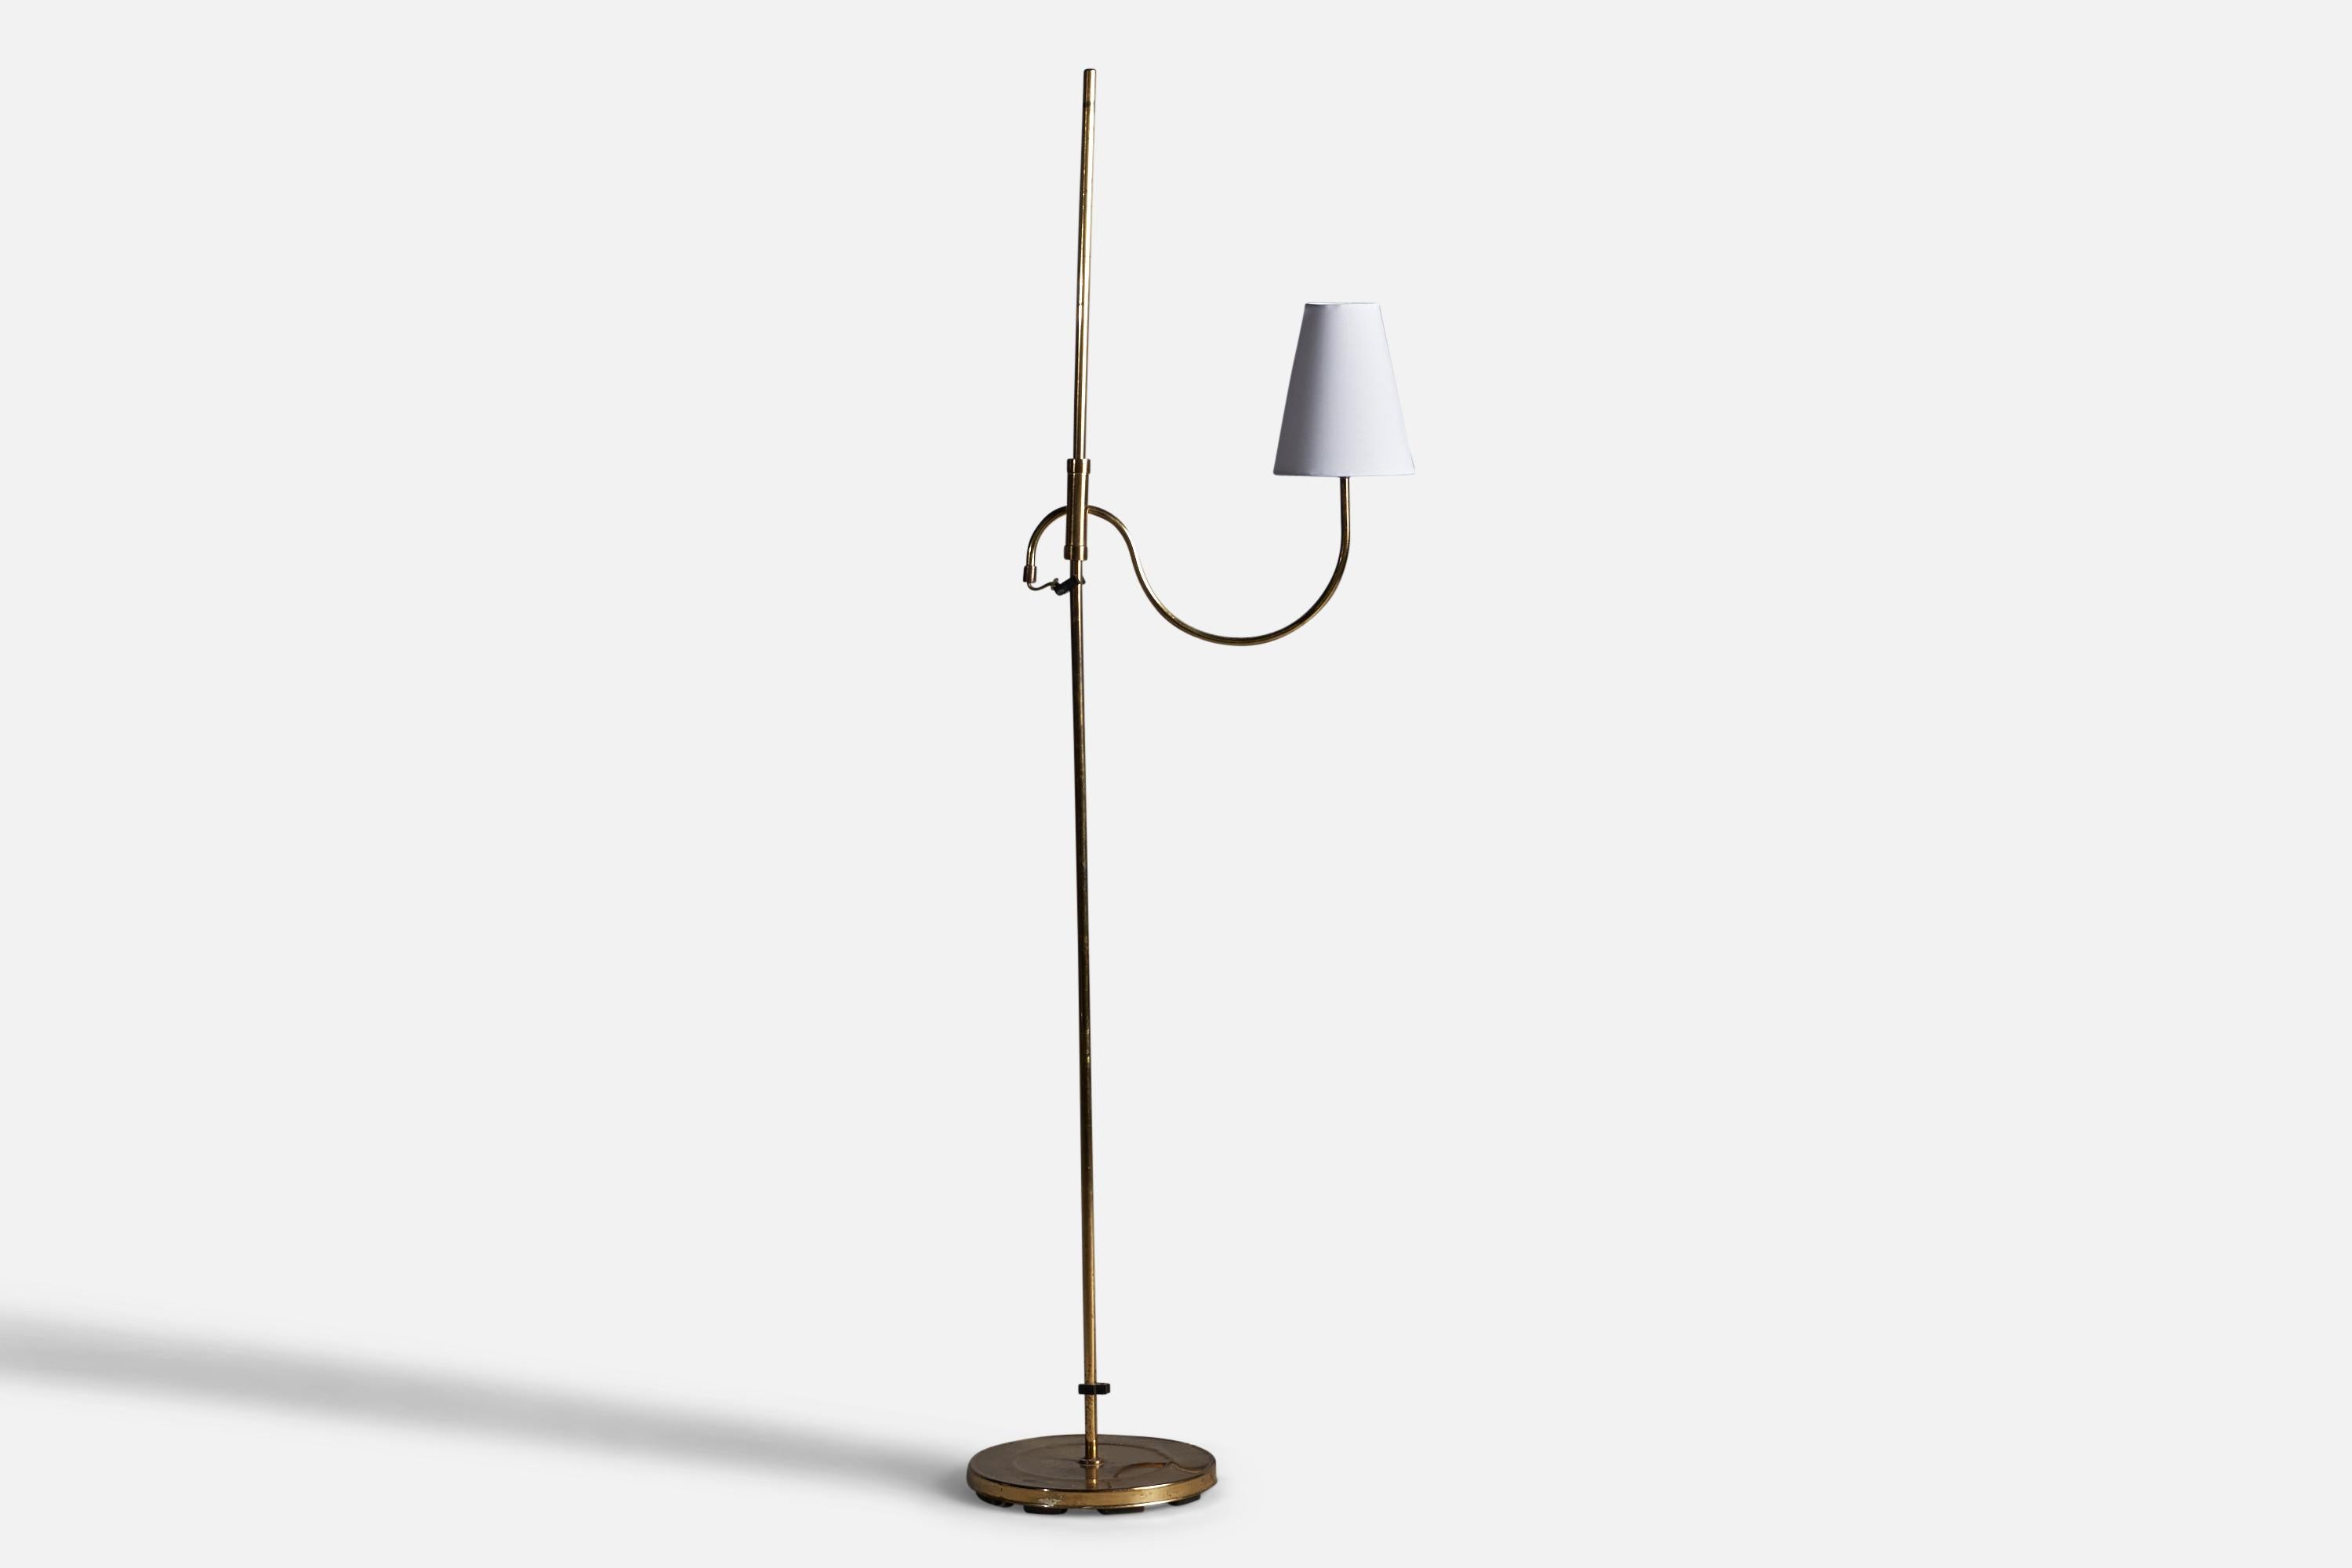 An adjustable brass, white fabric and plastic floor lamp, designed and produced by Abo Randers, Denmark, 1960s.

Overall Dimensions: 55